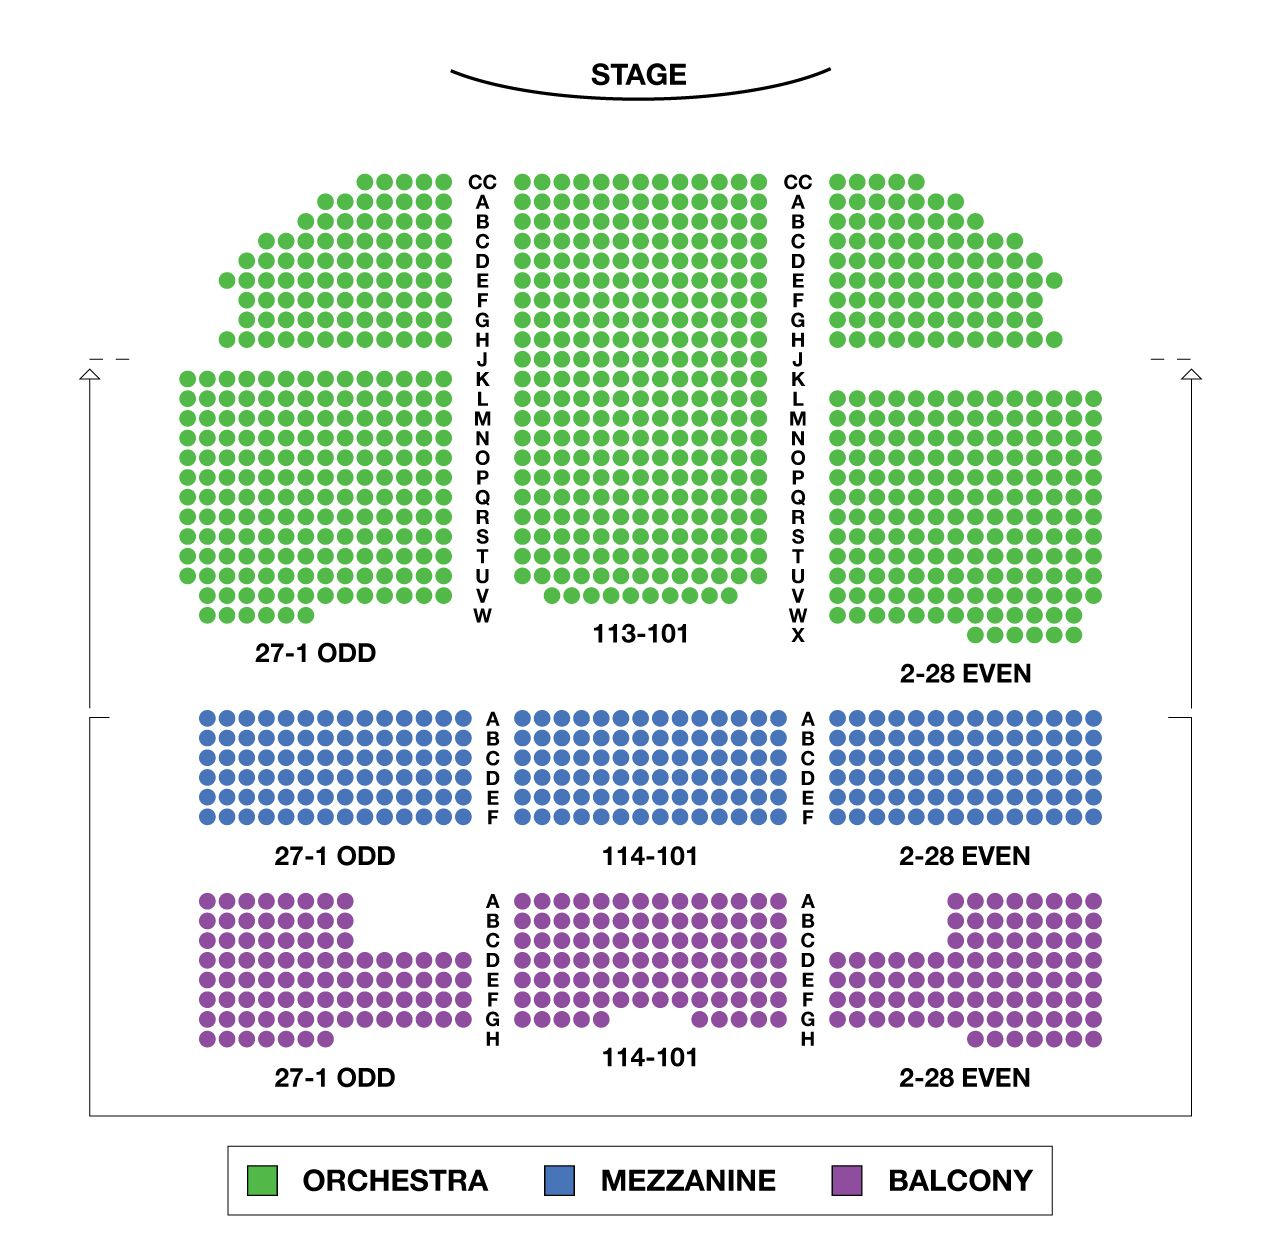 Richard Rodgers Theatre Broadway Seating Chart Large Richard Rodgers